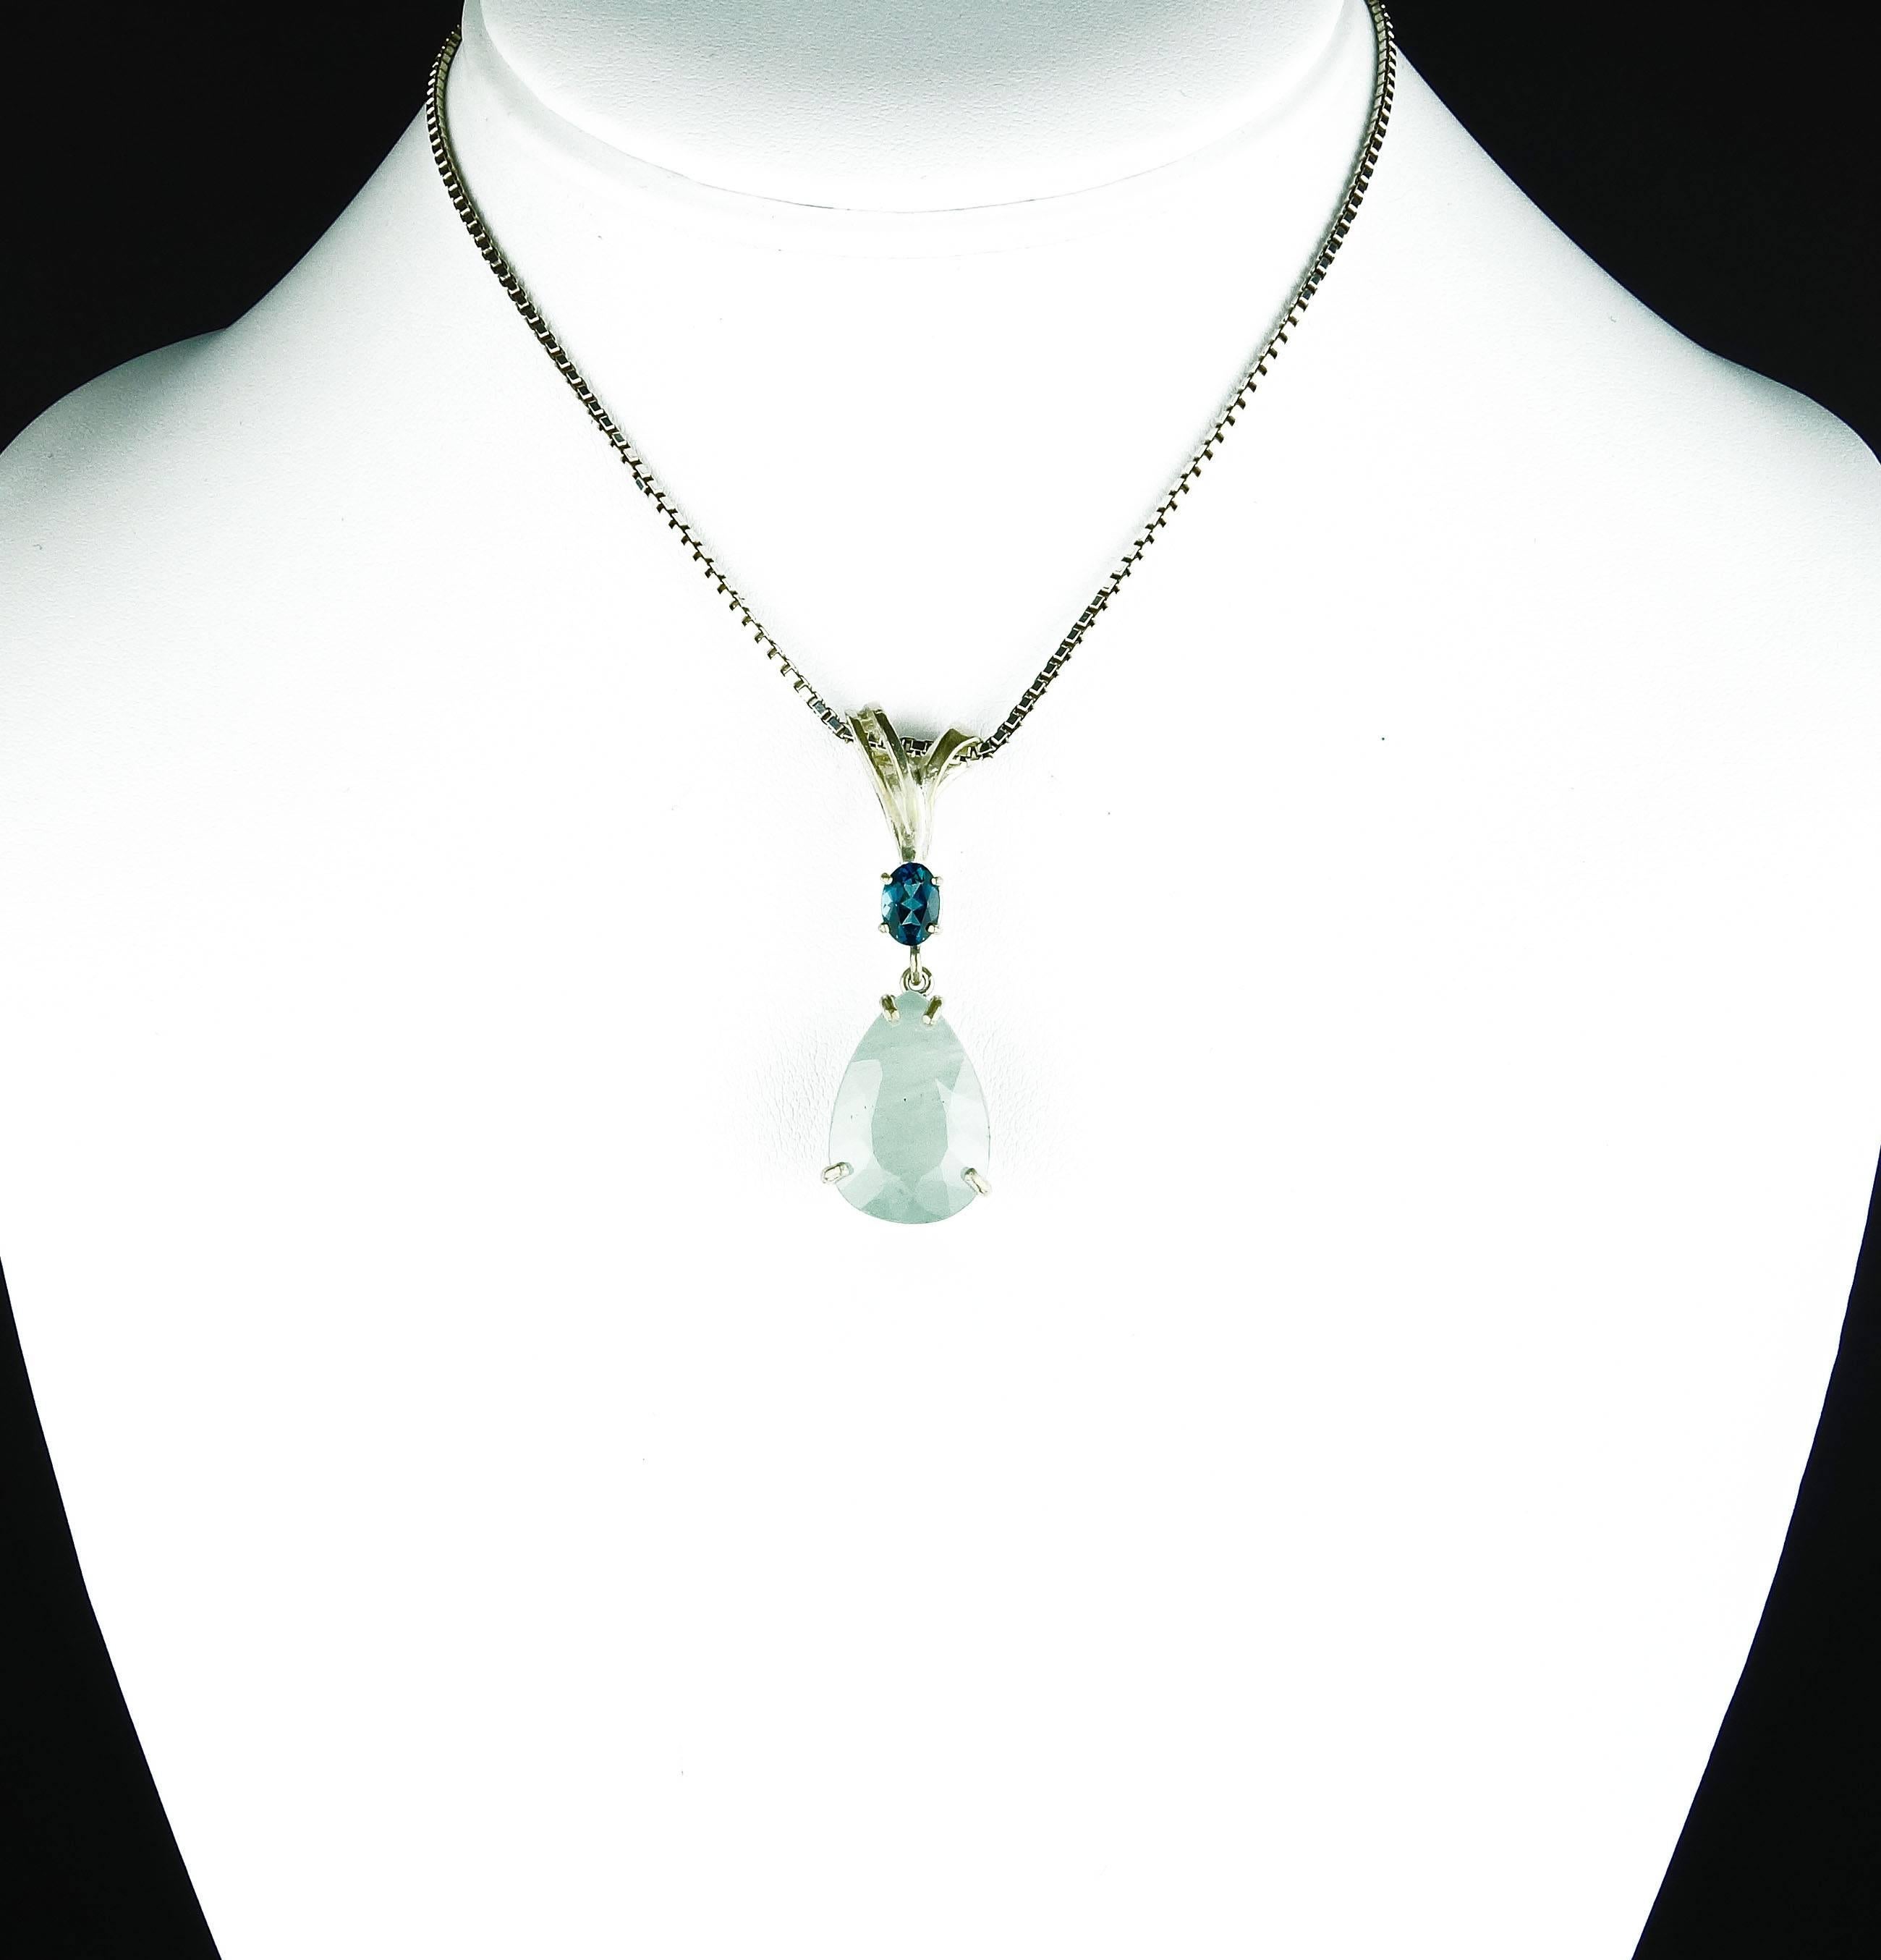 This 8.8 carat natural pale blue Aquamarine (measures 19.9 mm x 13.2 mm) is enhanced with a brilliant sparkling blue Topaz (measures 6.7 mm x 4.9 mm) set in a sterling silver pendant.  The top loop is very open to fit / slide on many different kinds